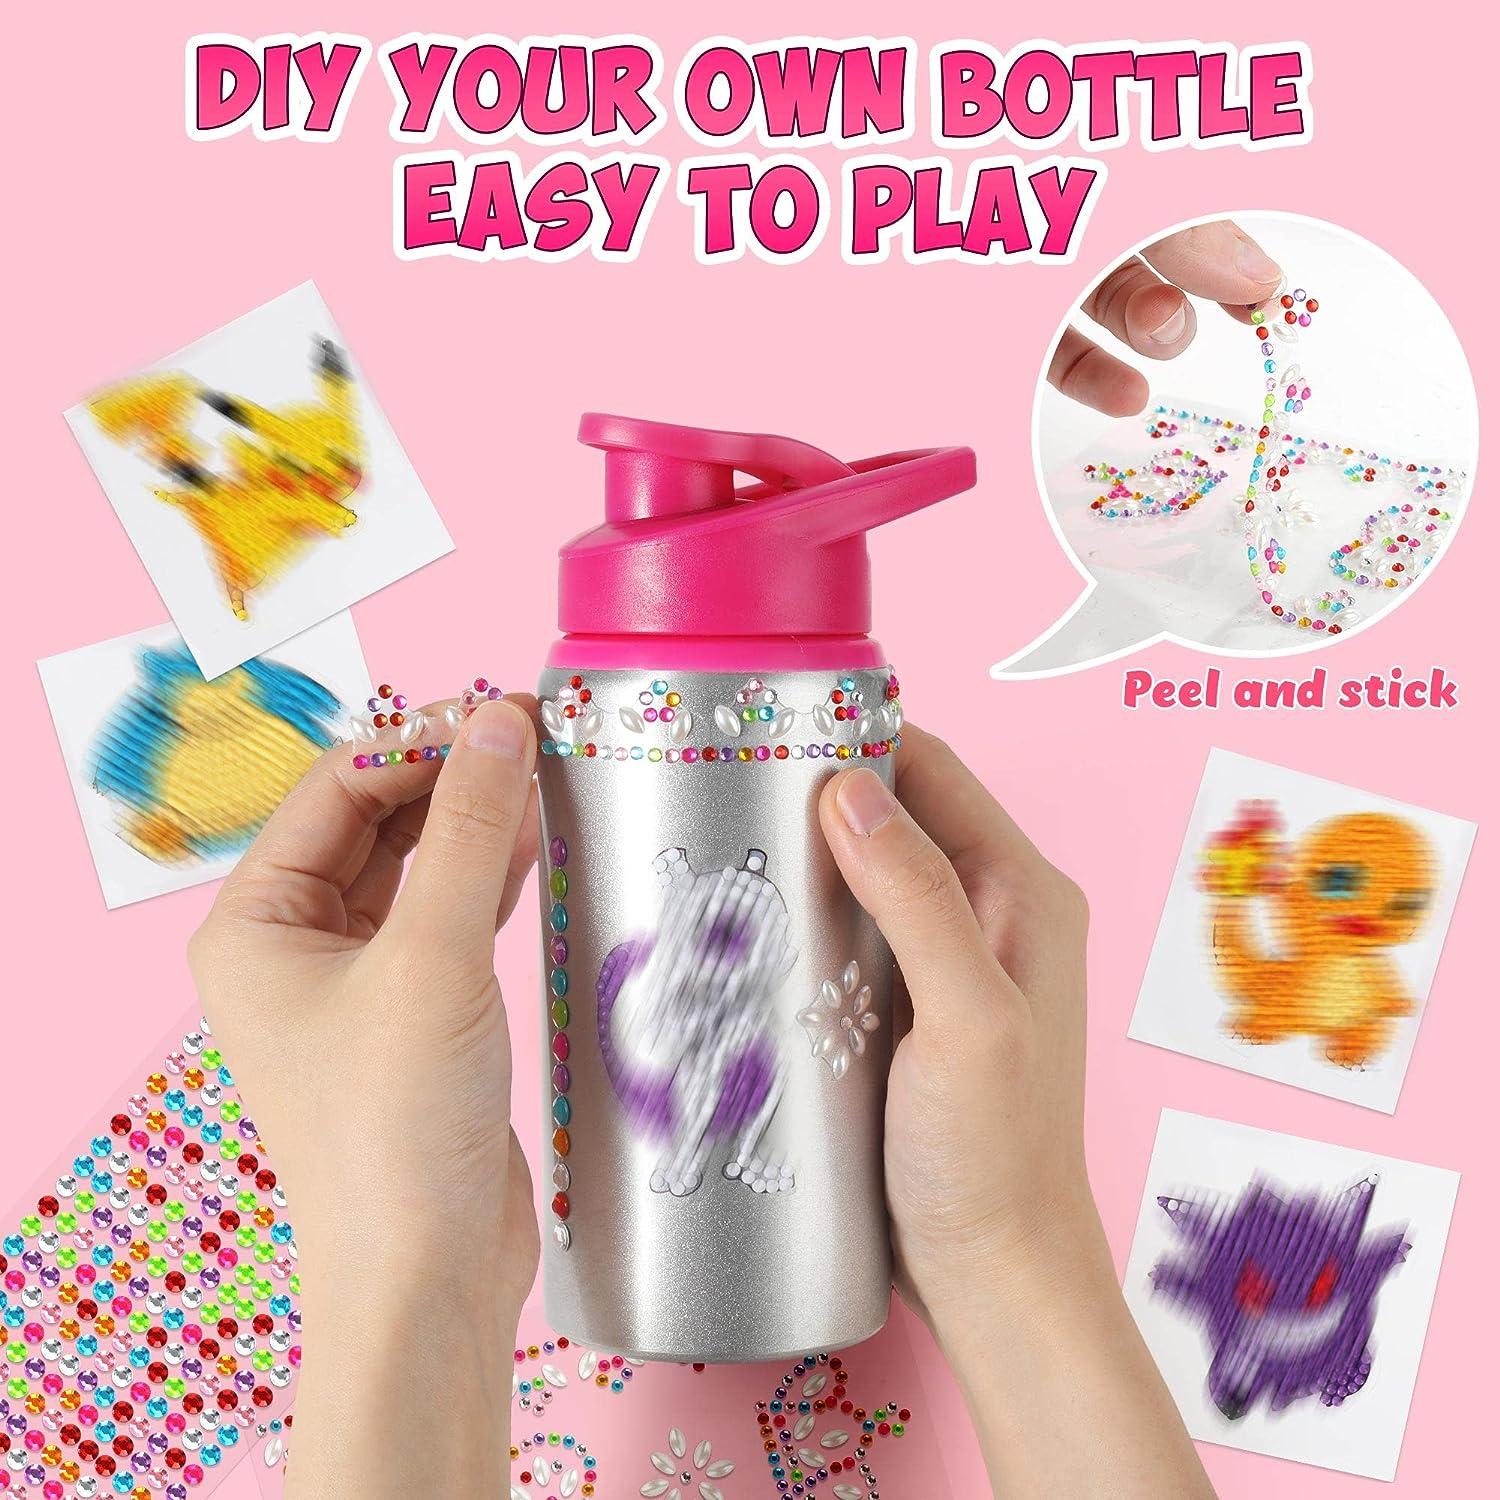  Gift for Girl Decorate Personalize Your Own Water Bottles with  Gem Art Stickers for Girls Kids Craft Kit Birthday & Easter Basket Stuffers  Gifts for Teen Fun DIY Art for Children